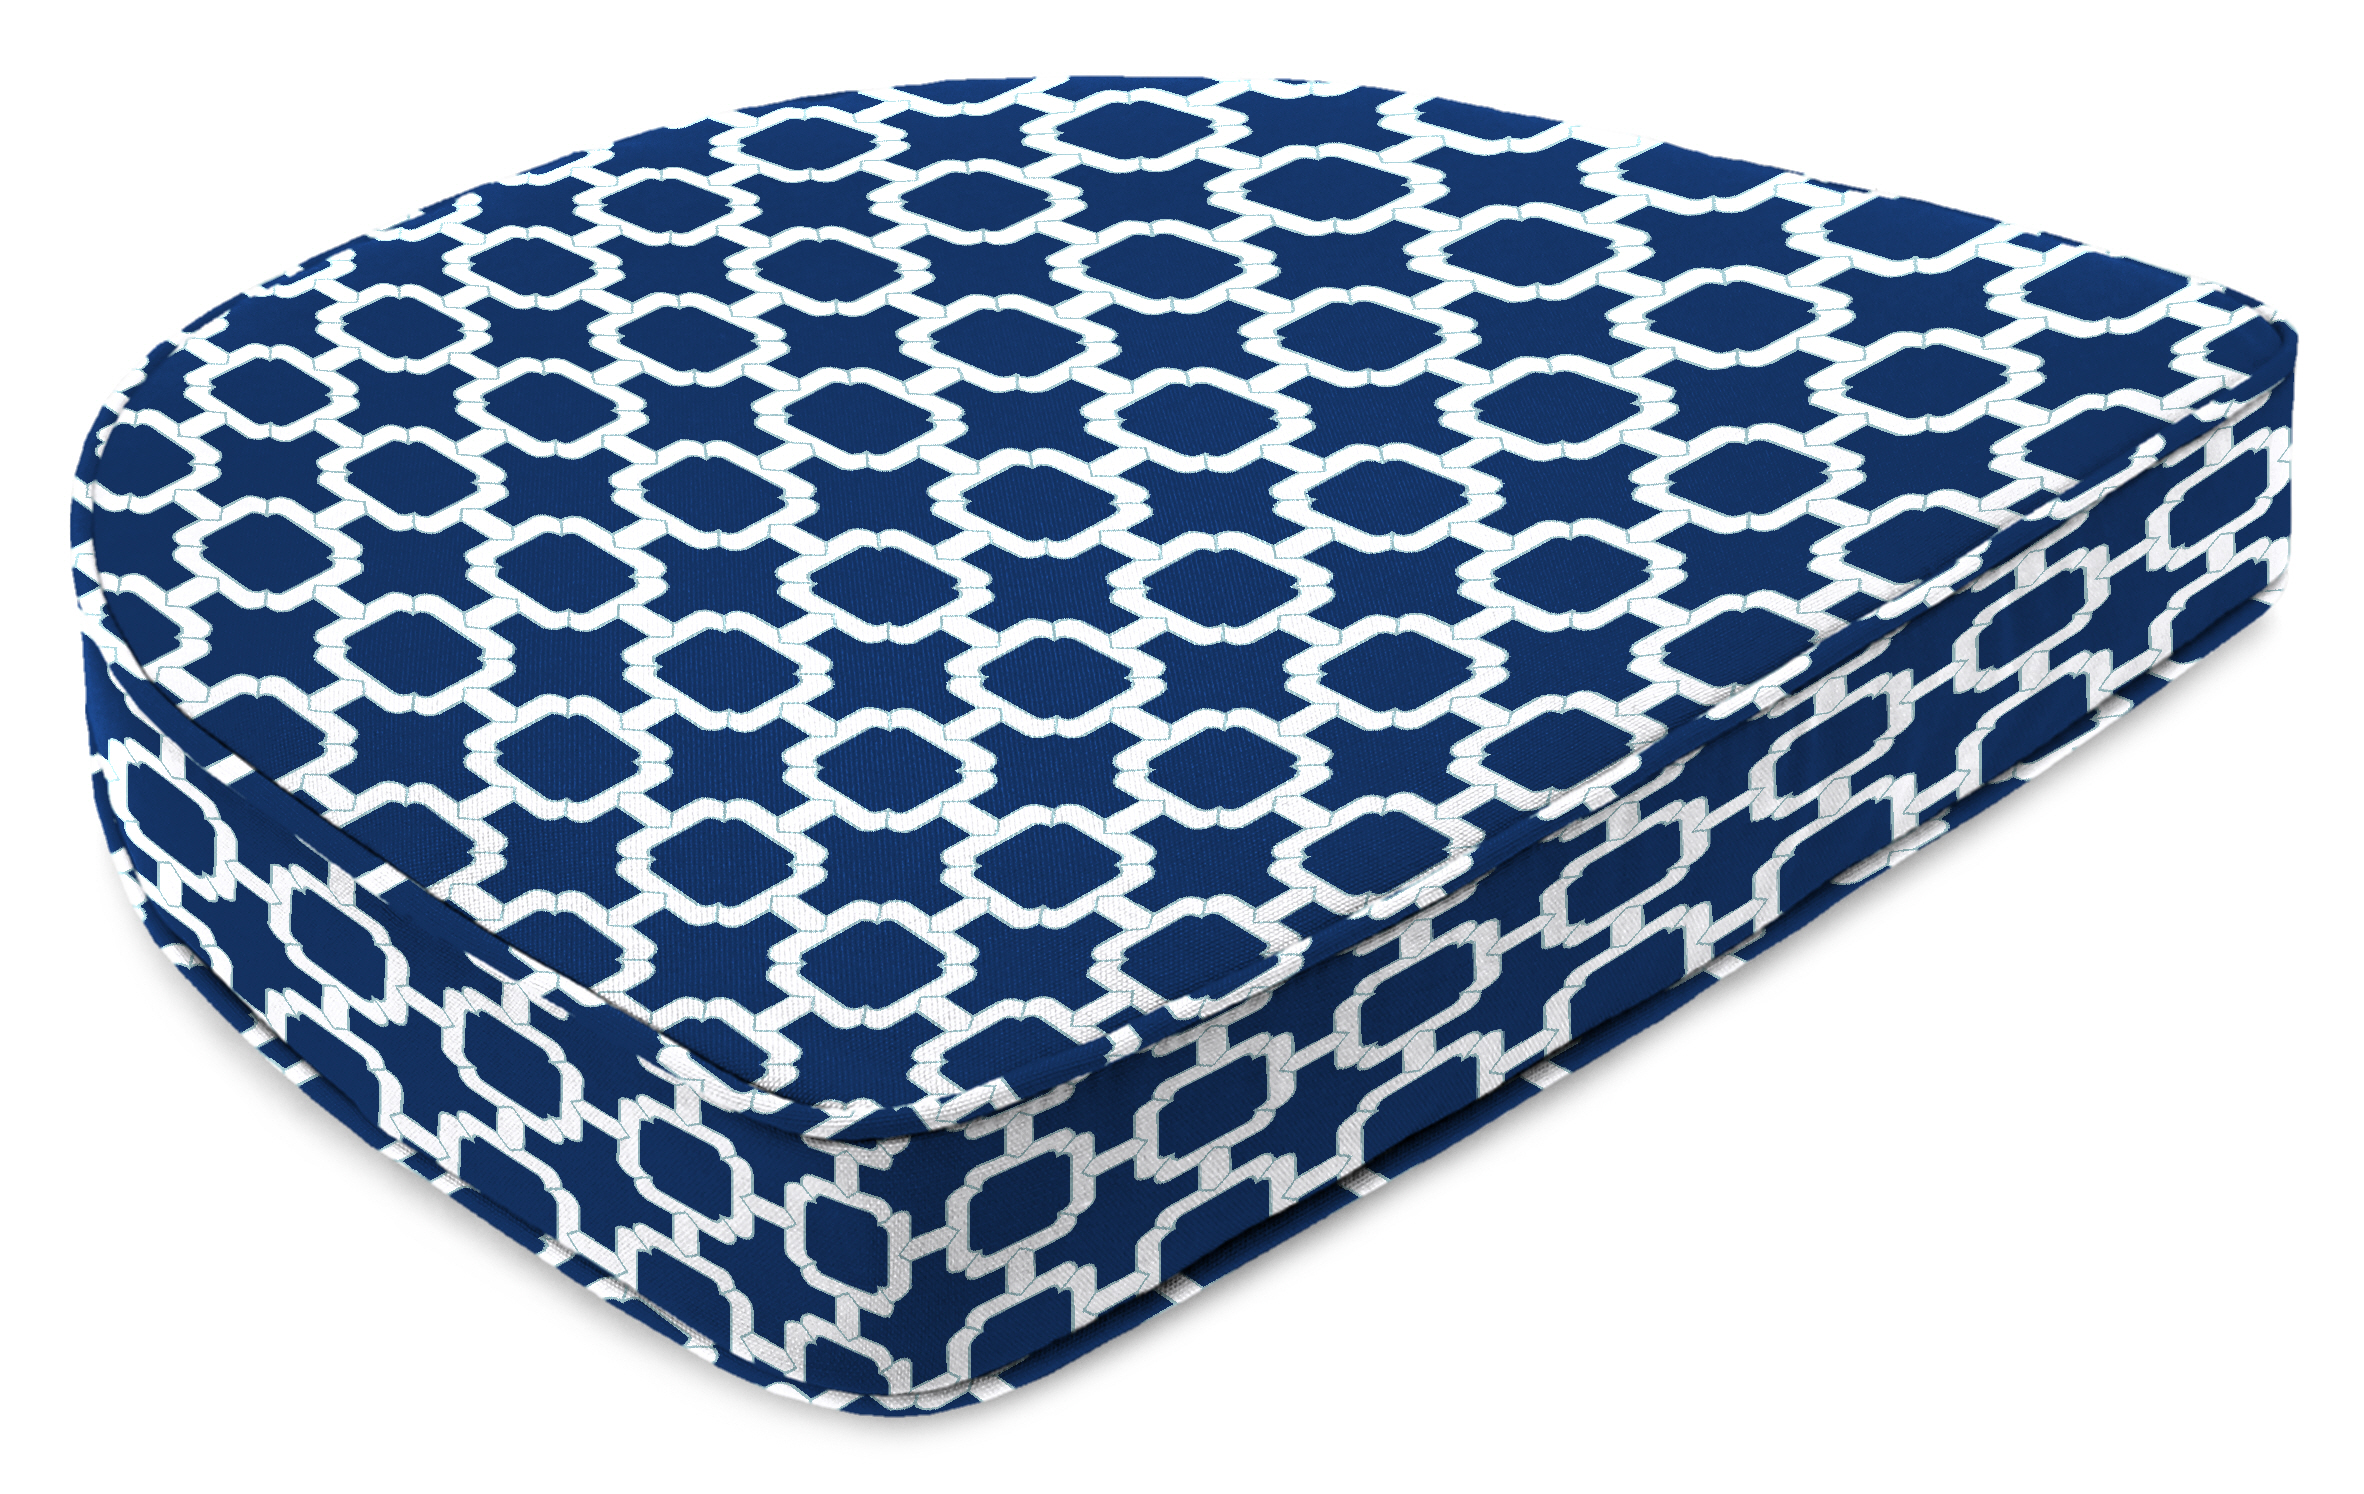 Contoured Boxed Patio Chair Cushion in Hockley Navy